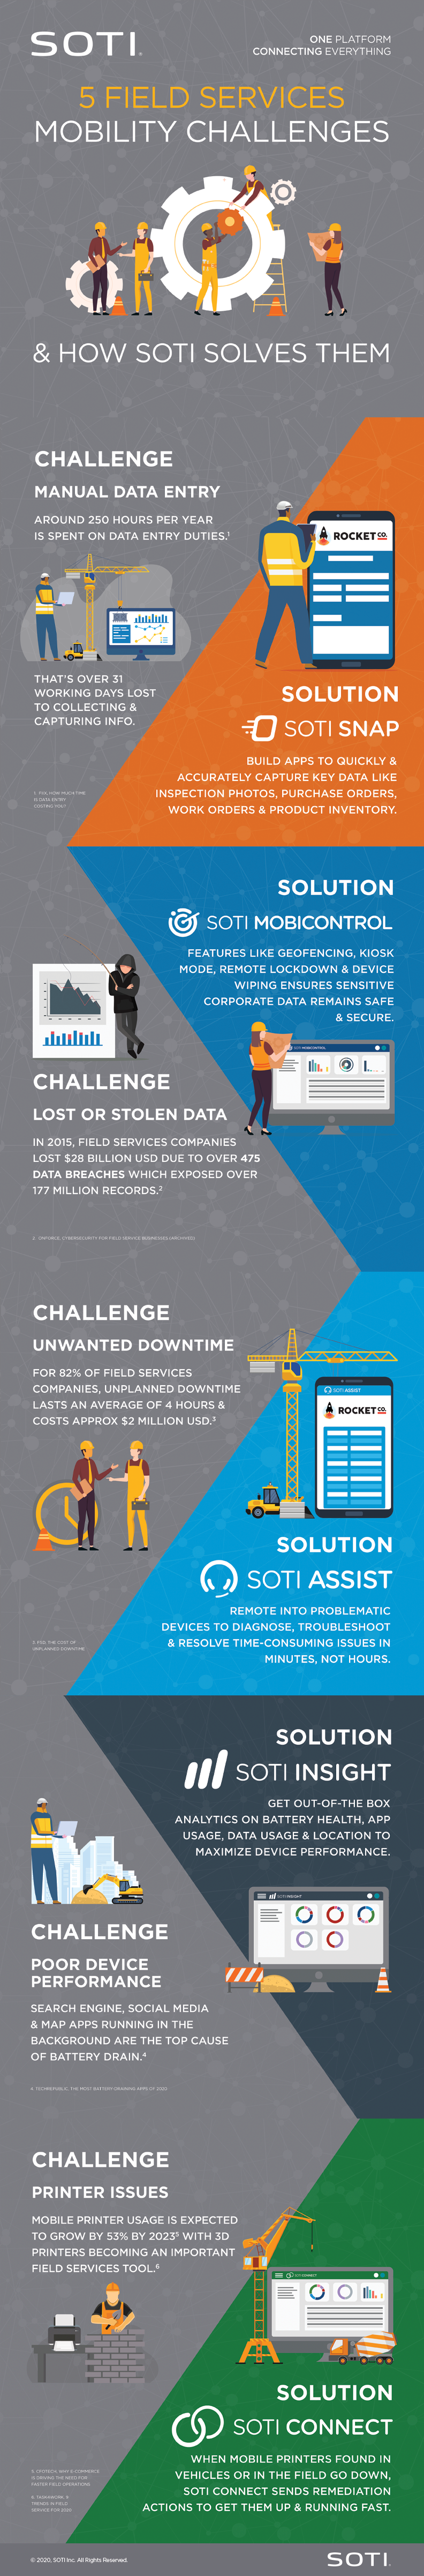 5 Field Services Mobility Challenges Infographic icon